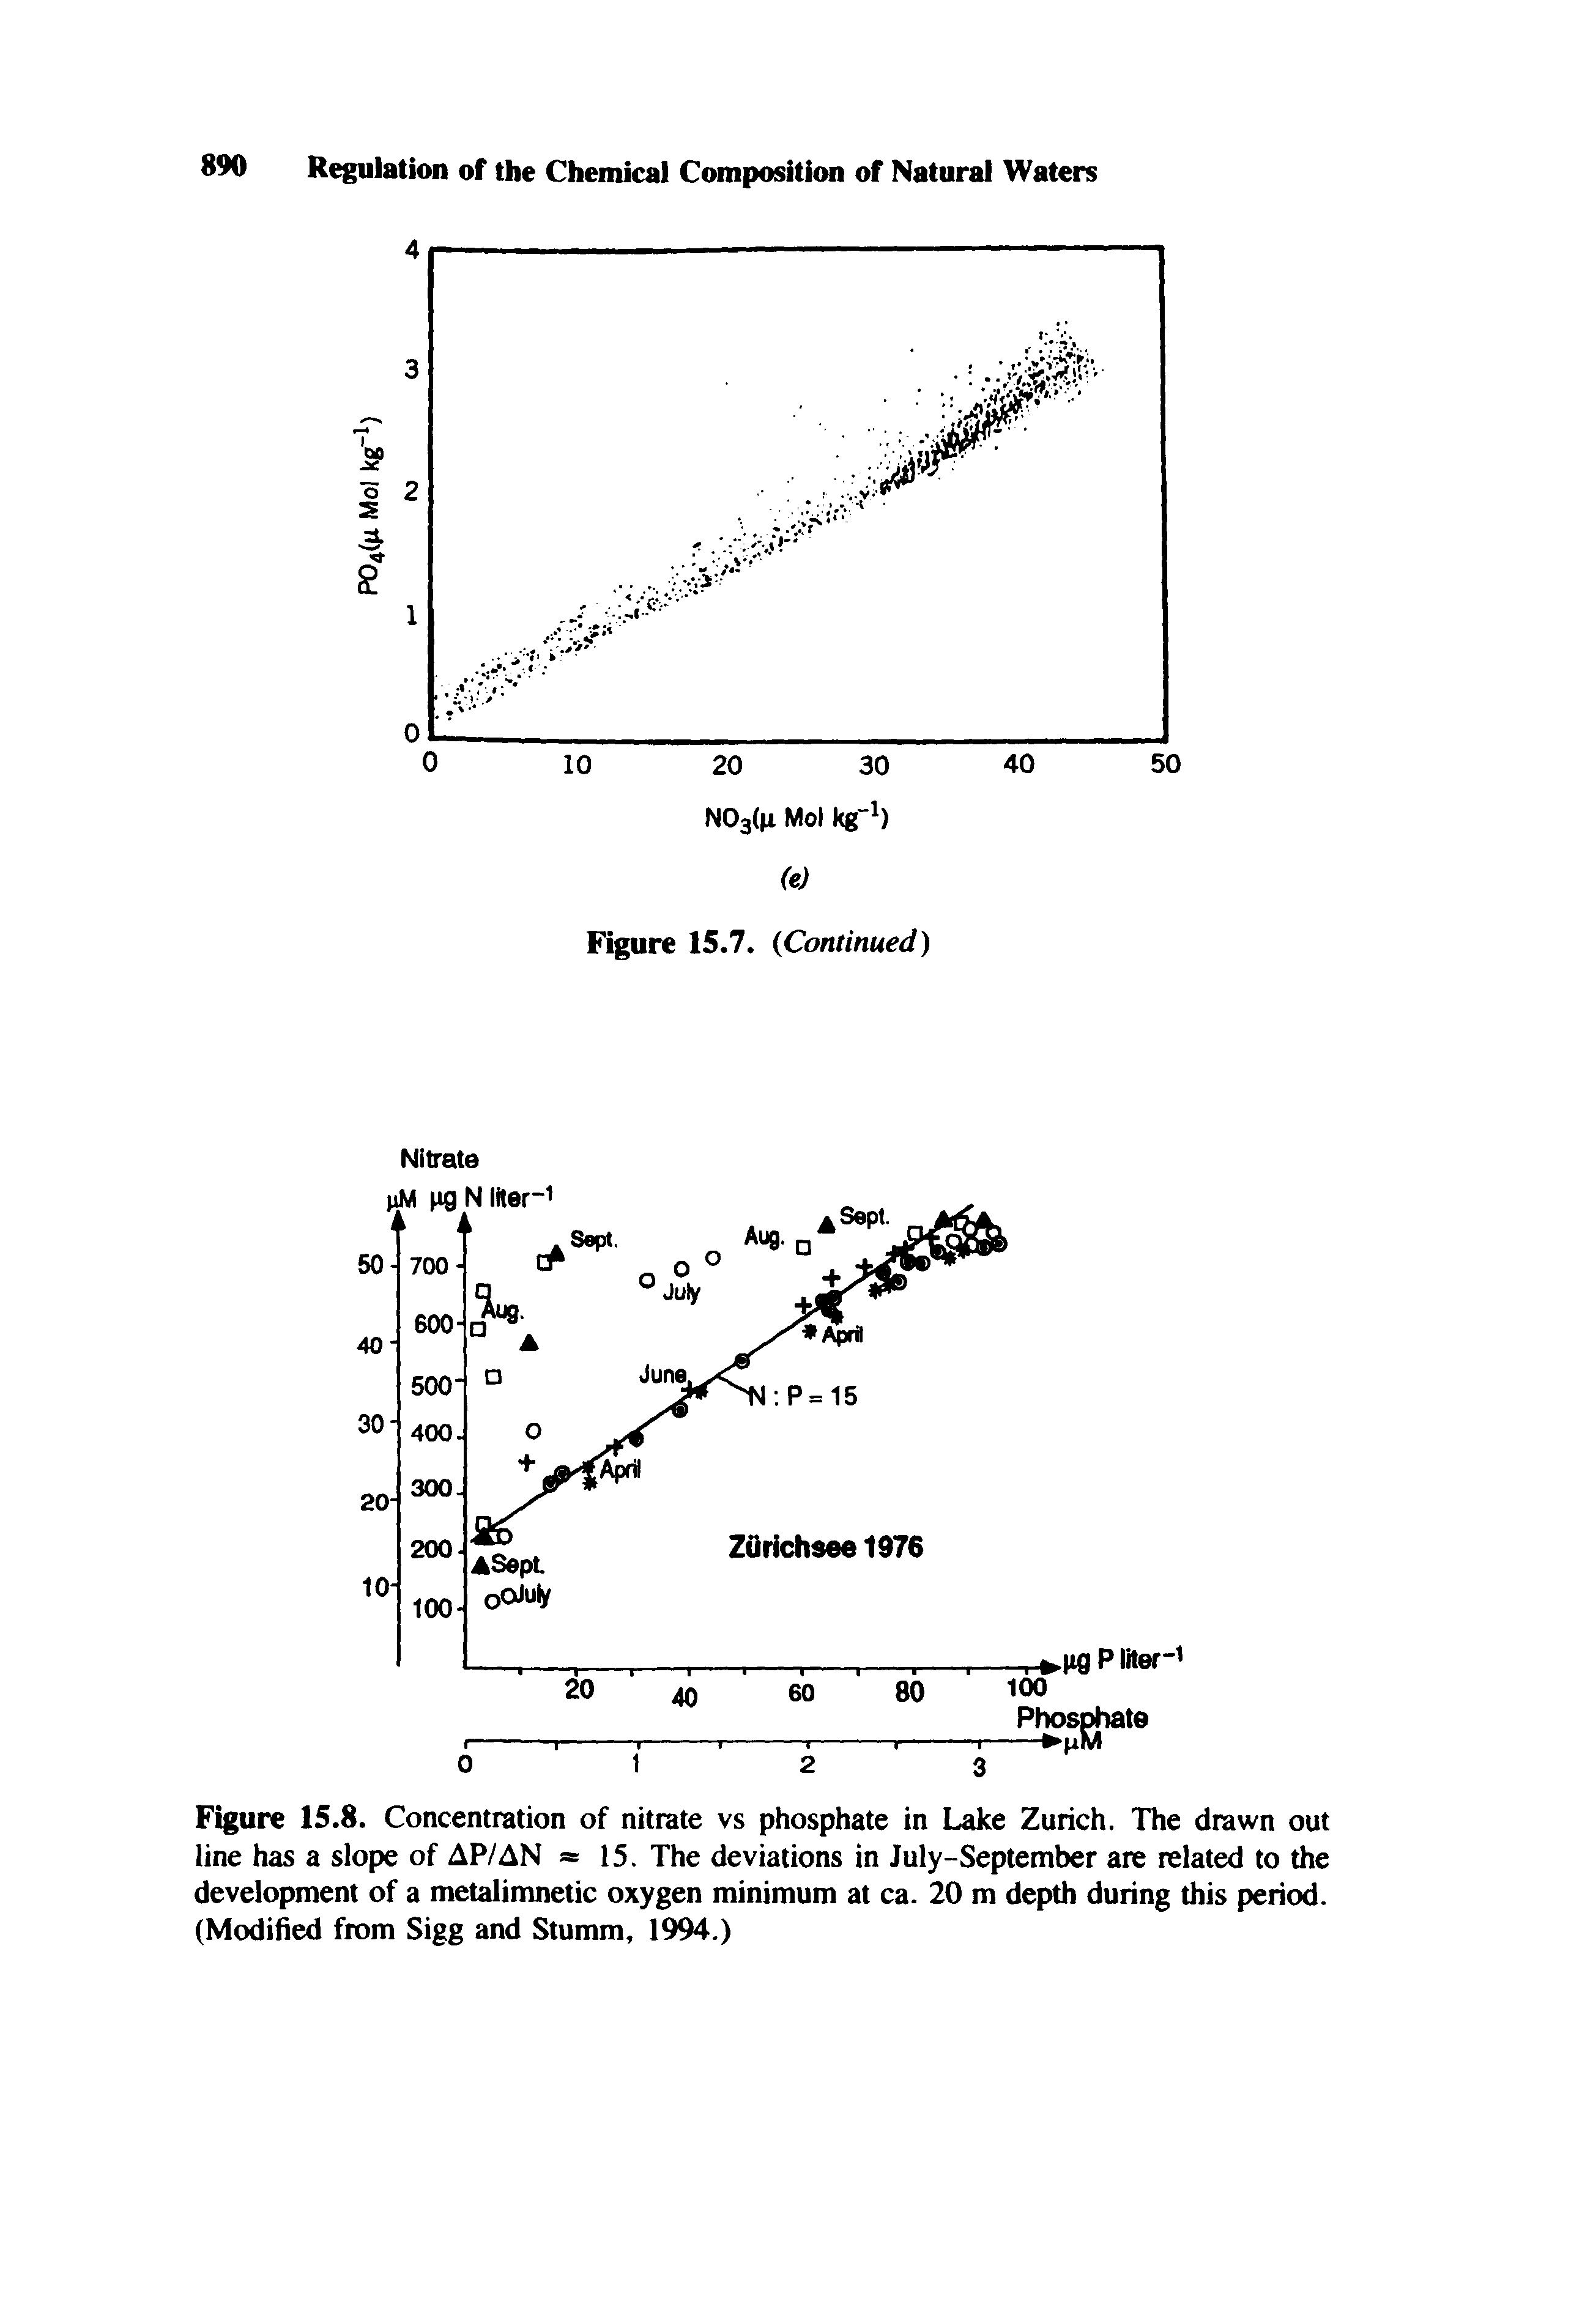 Figure 15.8. Concentration of nitrate vs phosphate in Lake Zurich. The drawn out line has a slope of AP/AN 15. The deviations in July-September are related to the development of a metalimnetic oxygen minimum at ca. 20 m depth during this period. (Modified from Sigg and Stumm, 1994.)...